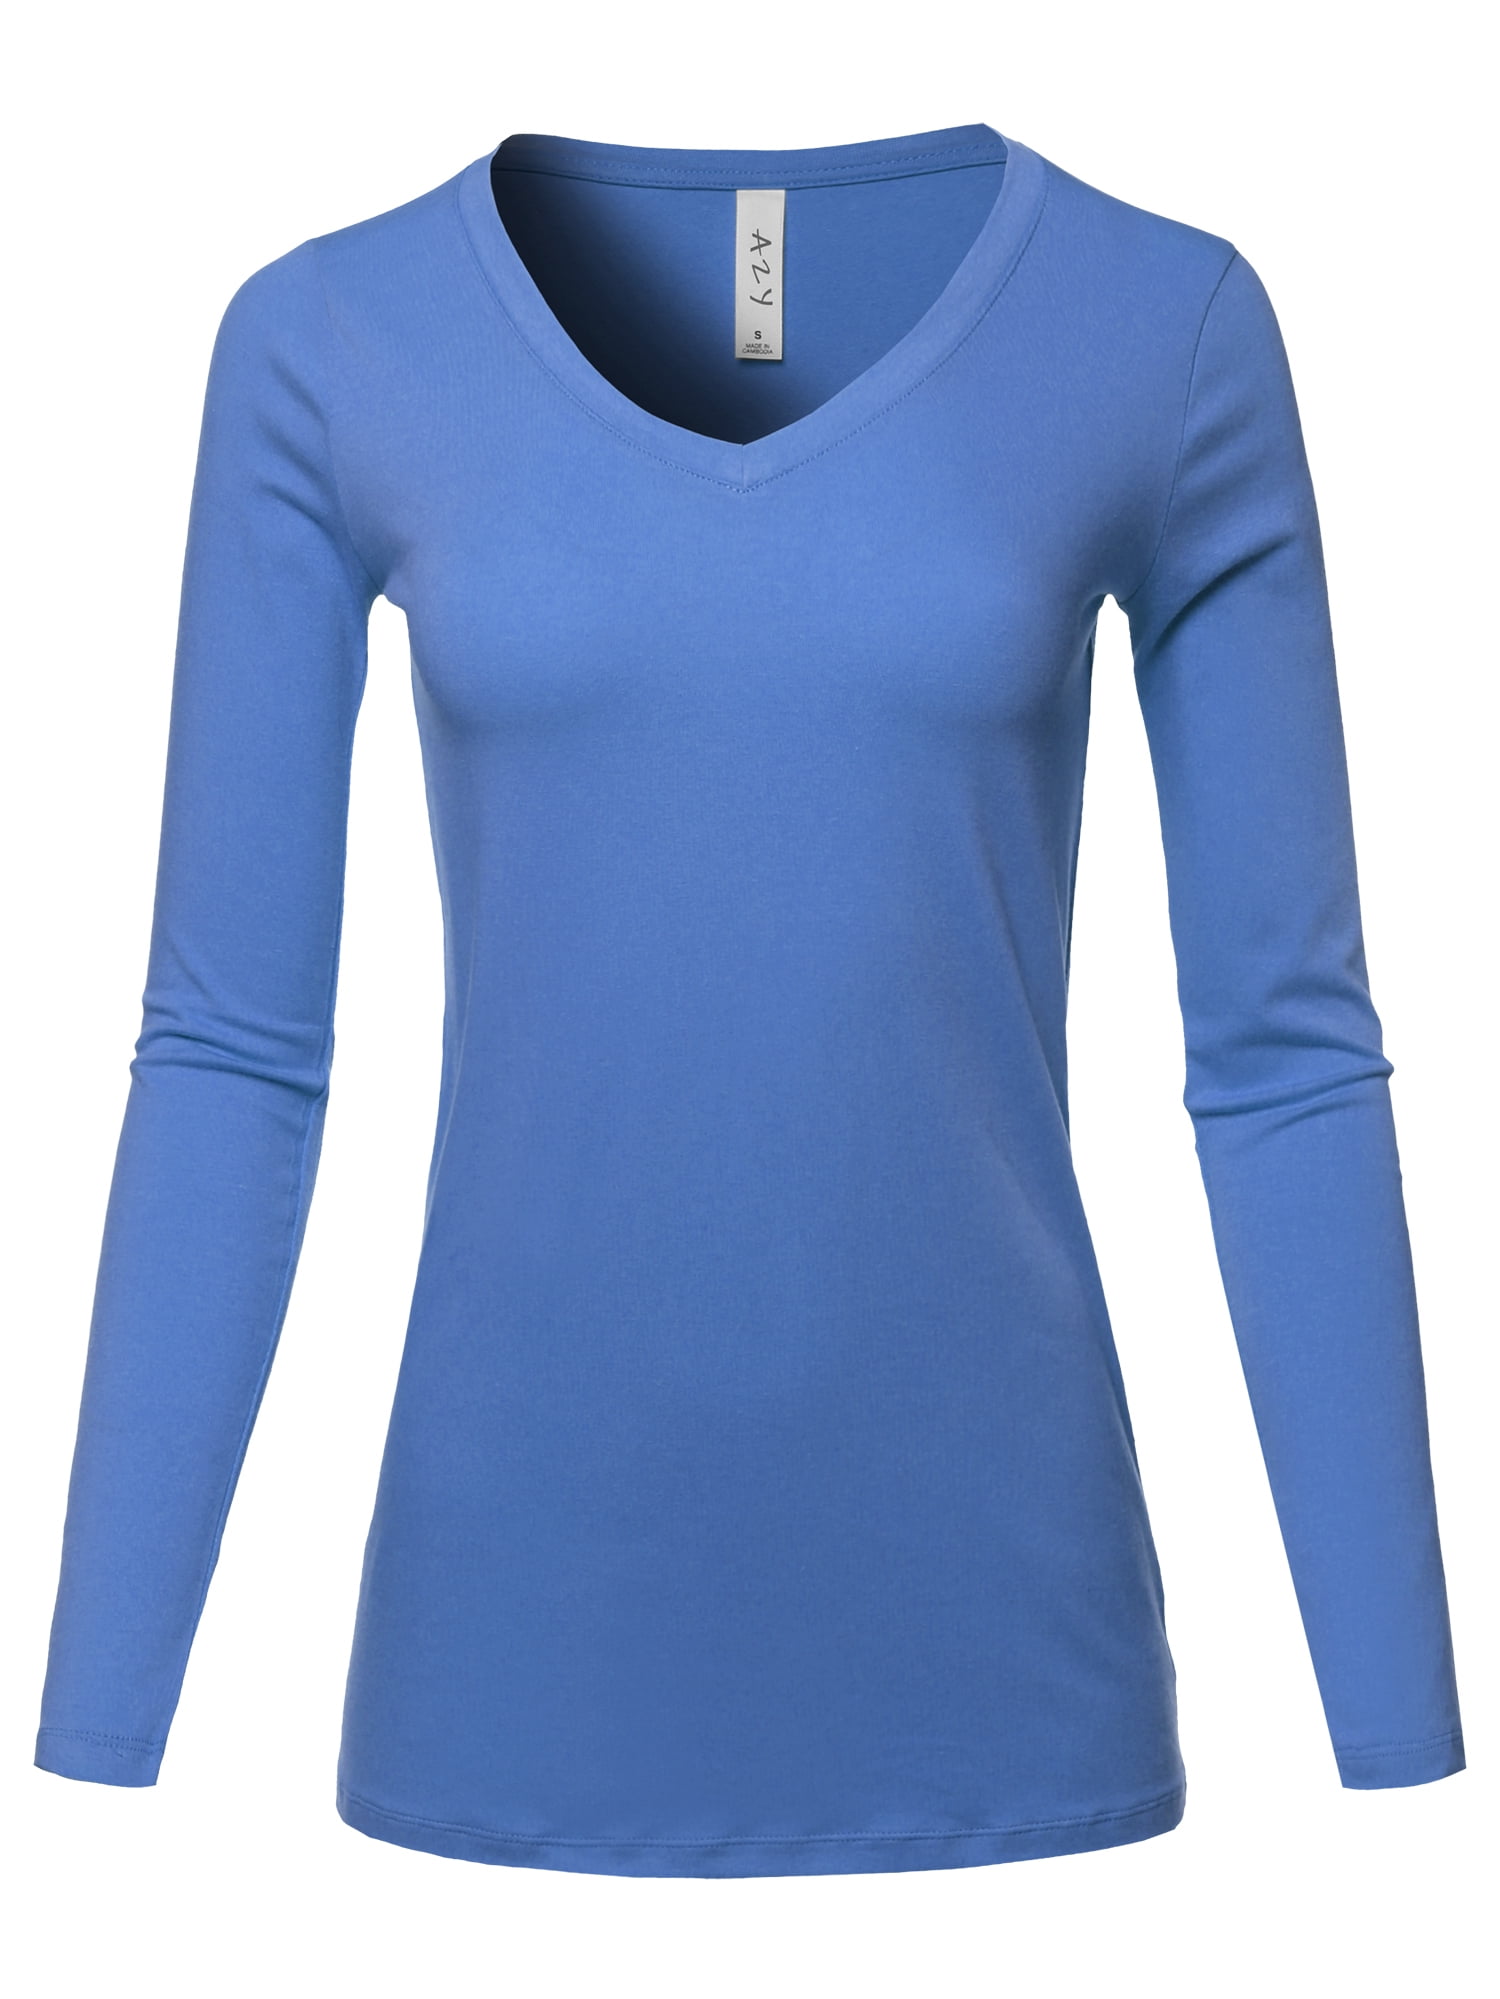 A2Y Women's Basic Solid Soft Cotton Long Sleeve V-neck Top T-shirt Blue ...